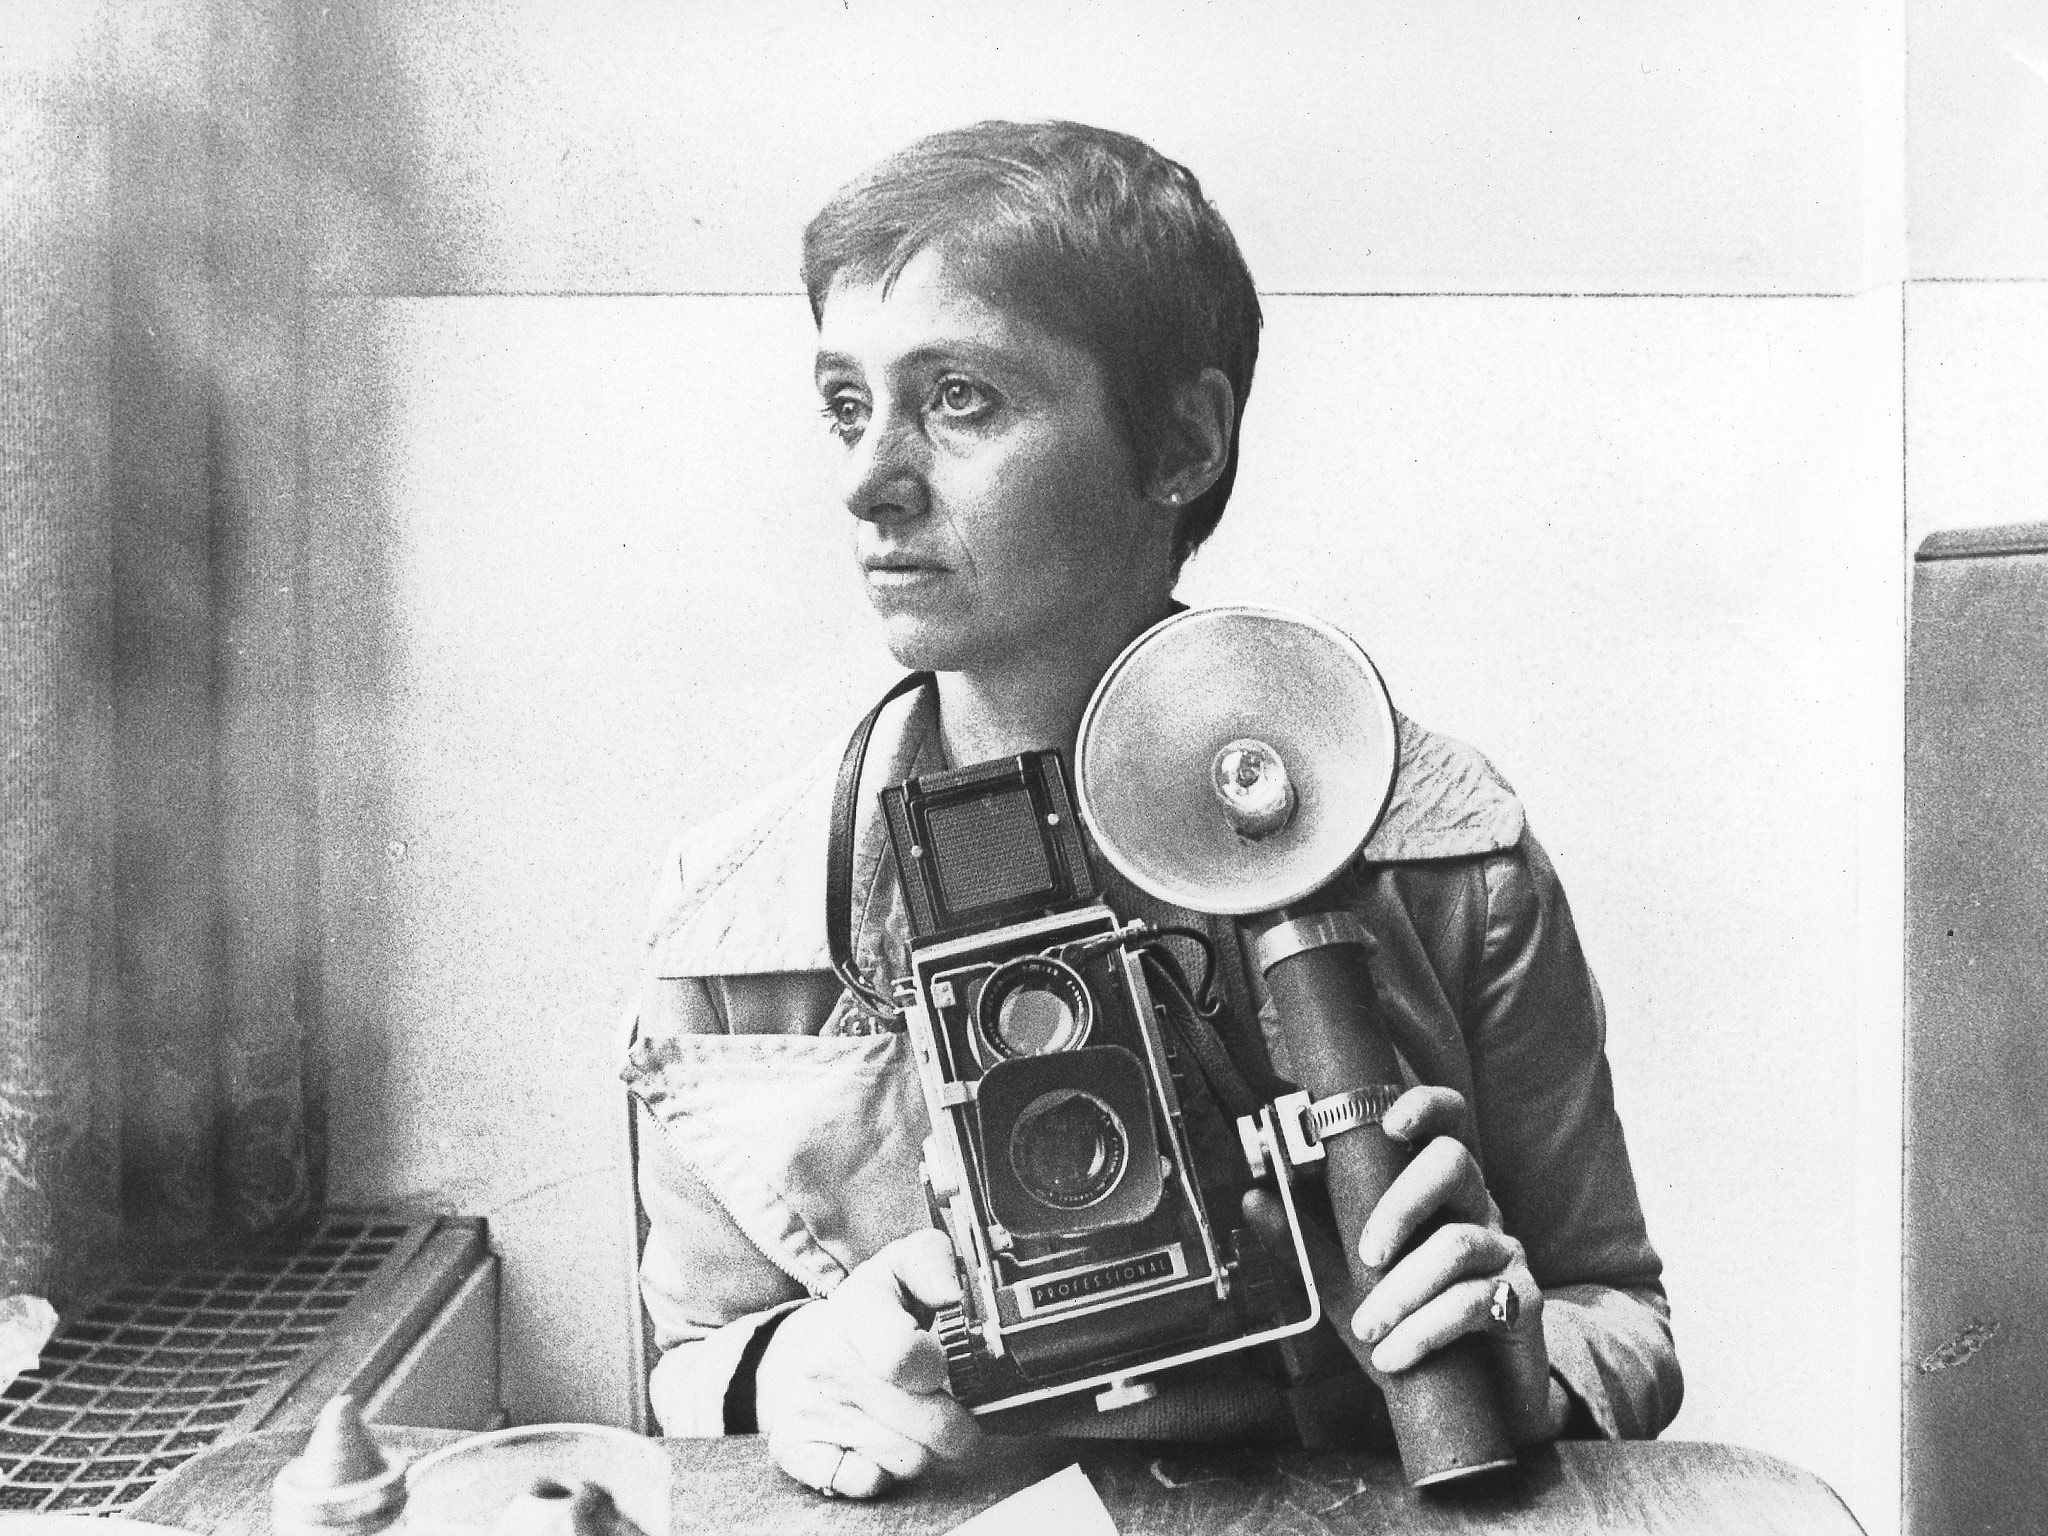 On Diane Arbus and influence - The Vampires Wife